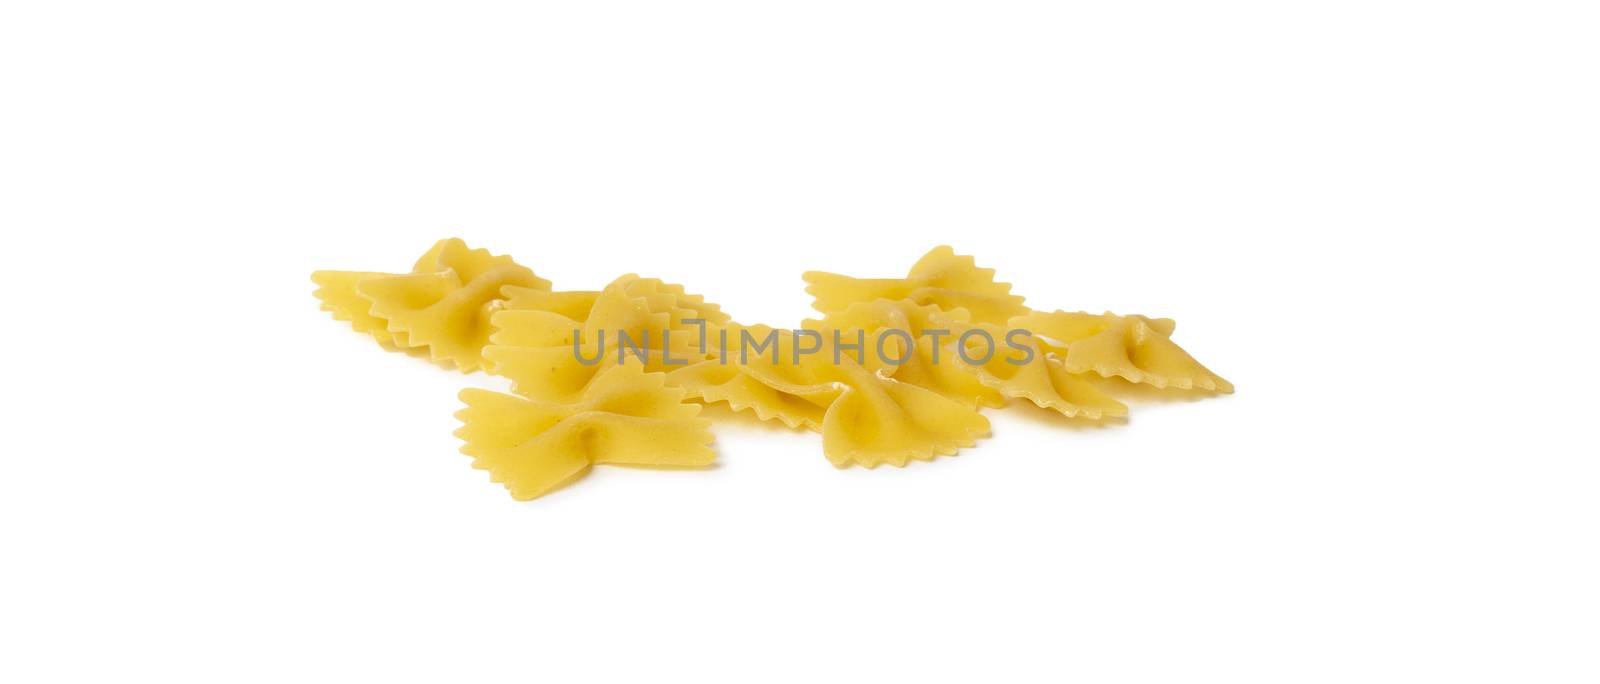 Farfalle pasta isolated on white background by SlayCer